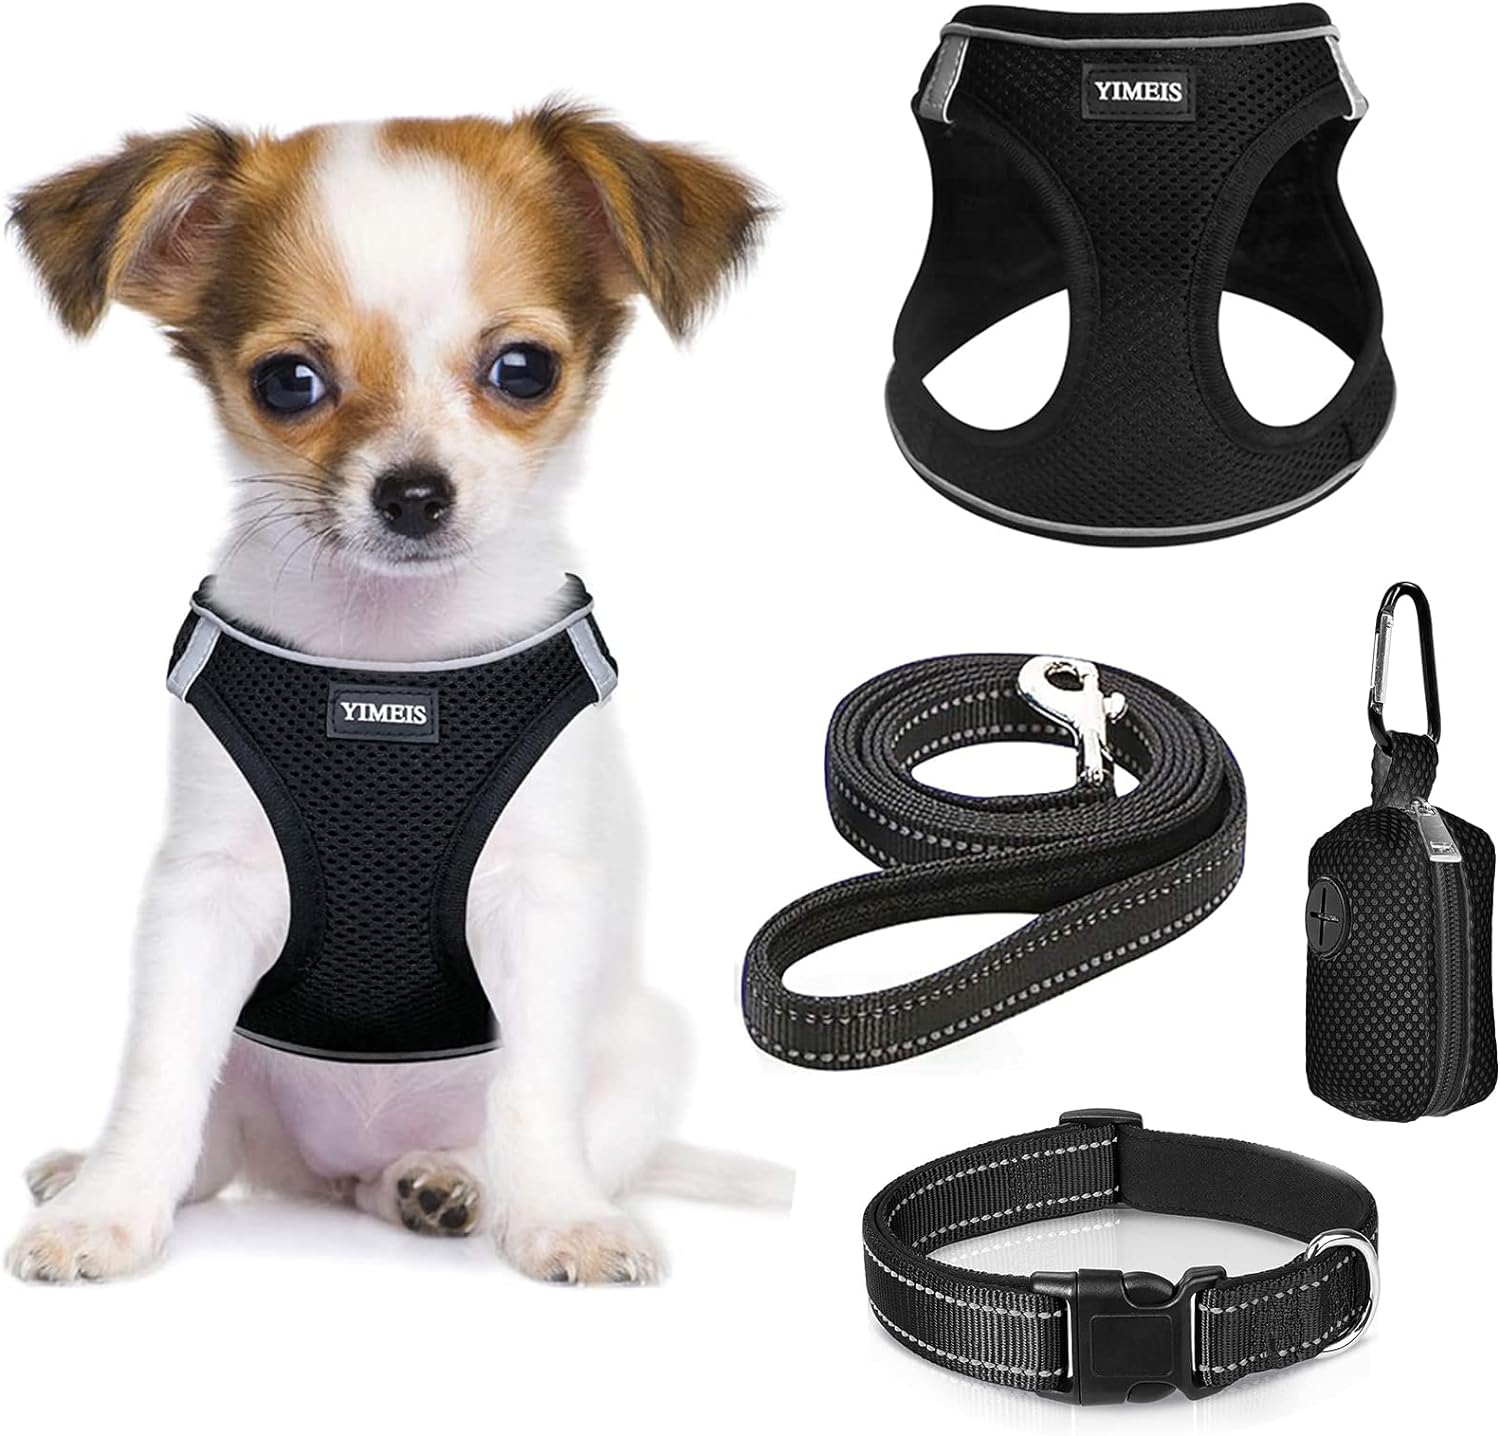 YIMEIS Dog Harness and Leash Set, No Pull Soft Mesh Pet Harness, Reflective Adjustable Puppy Vest for Small Medium Large Dogs, Cats (Black-Update, Medium (Pack of 1)